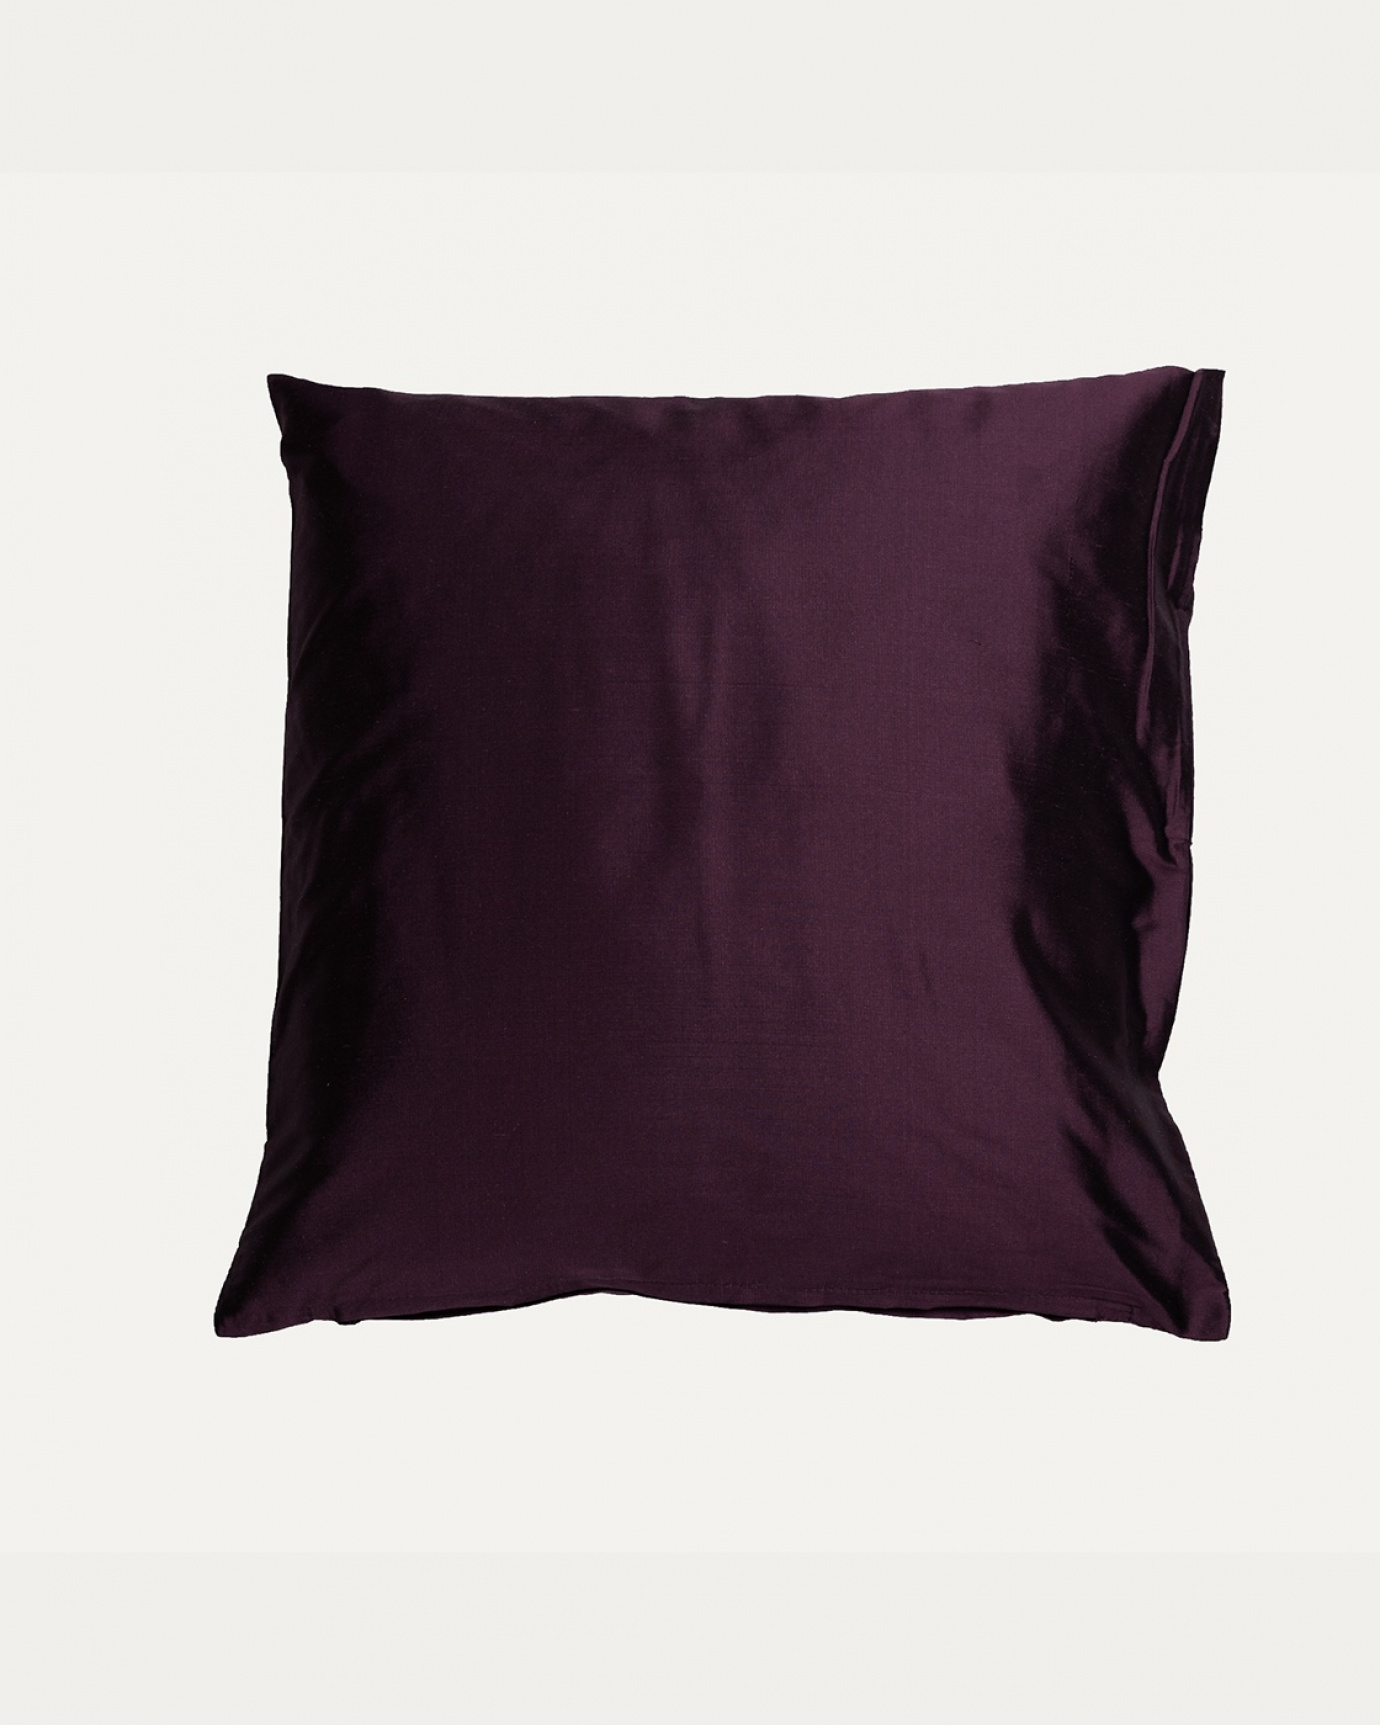 Product image dark pastel purple DUPION cushion cover made of 100% dupion silk from LINUM DESIGN. Size 40x40 cm.